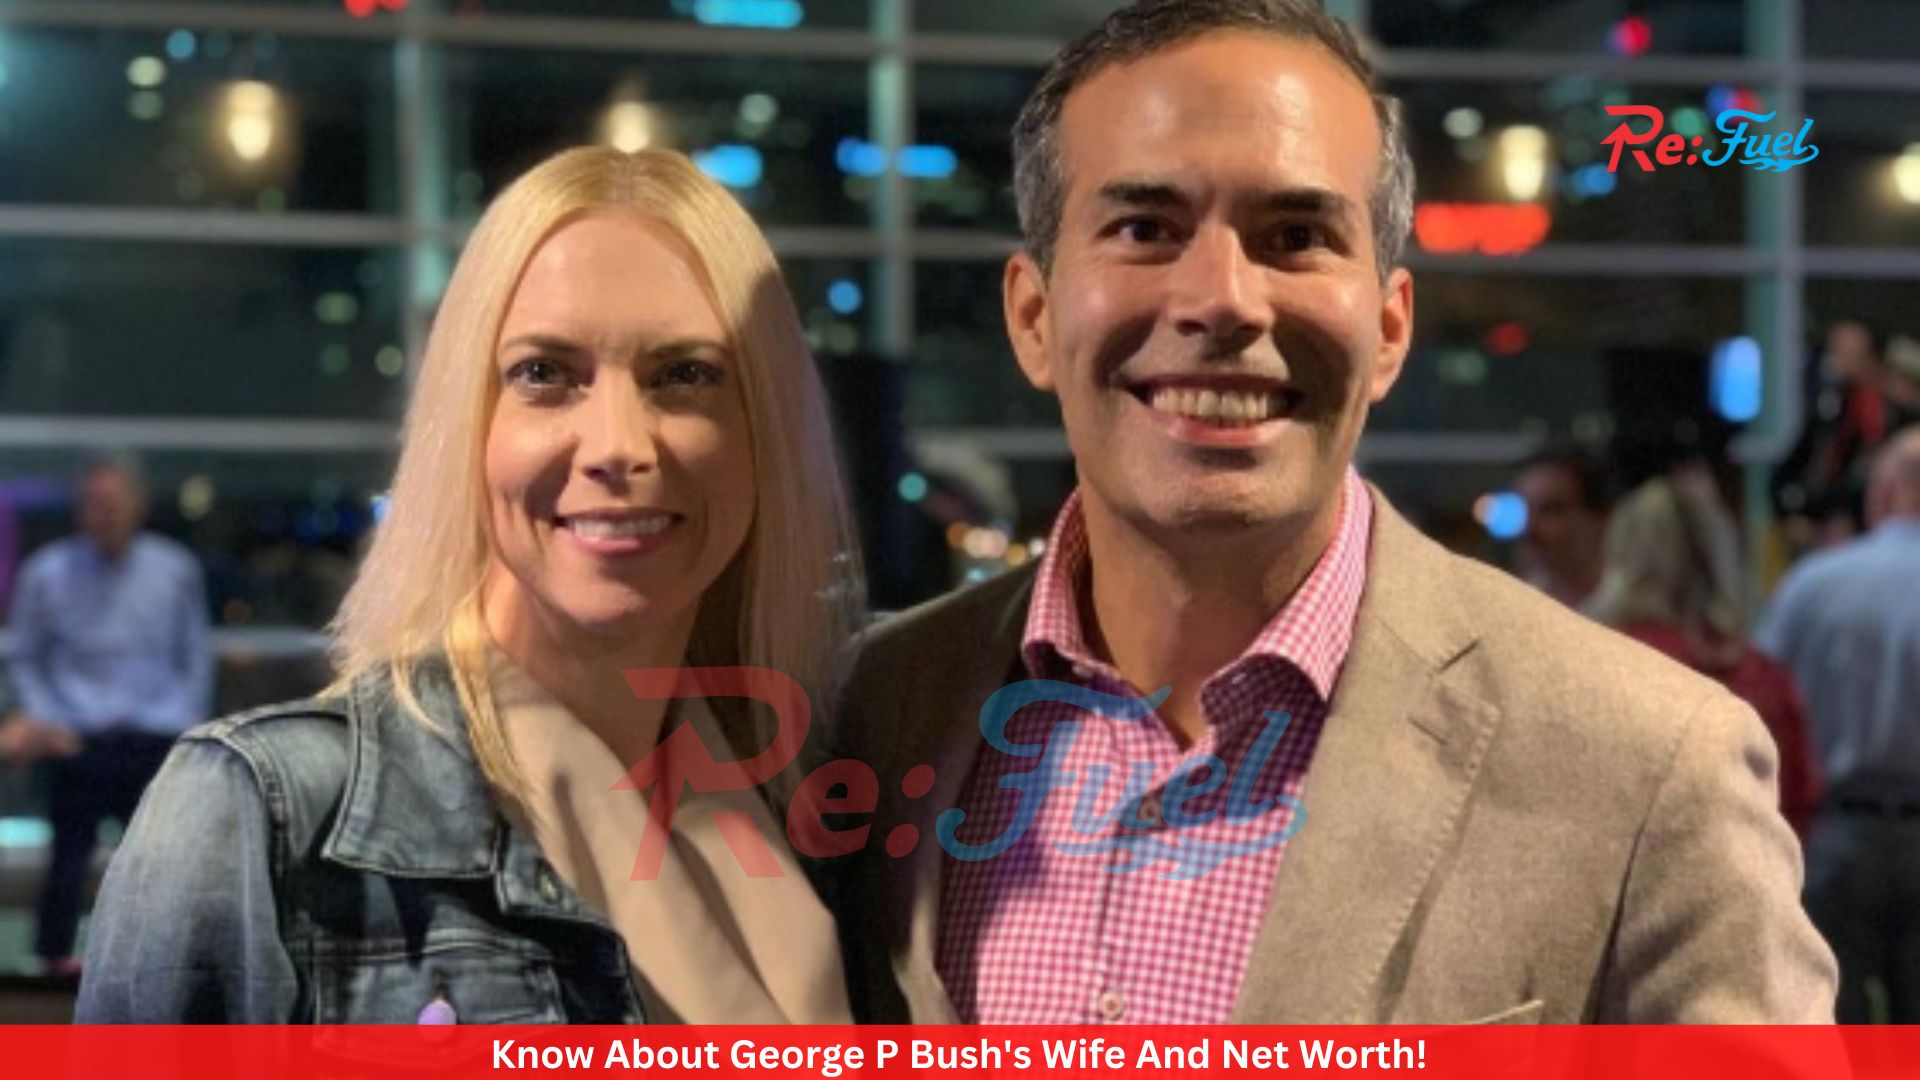 Know About George P Bush's Wife And Net Worth!